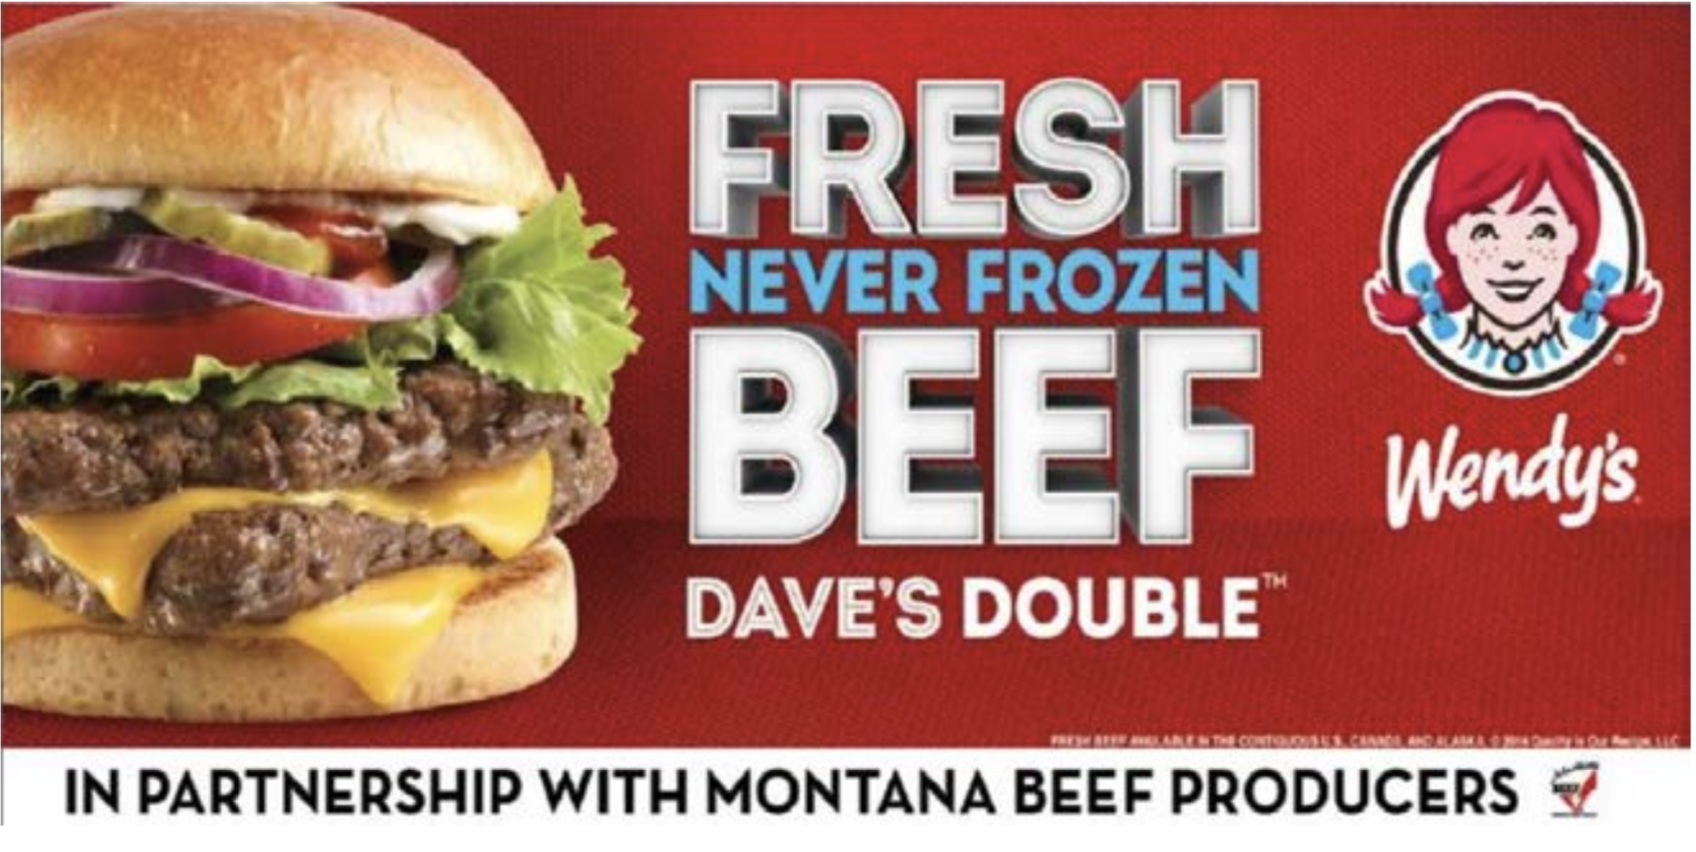 image of a wendys burger ad paid for by checkoff